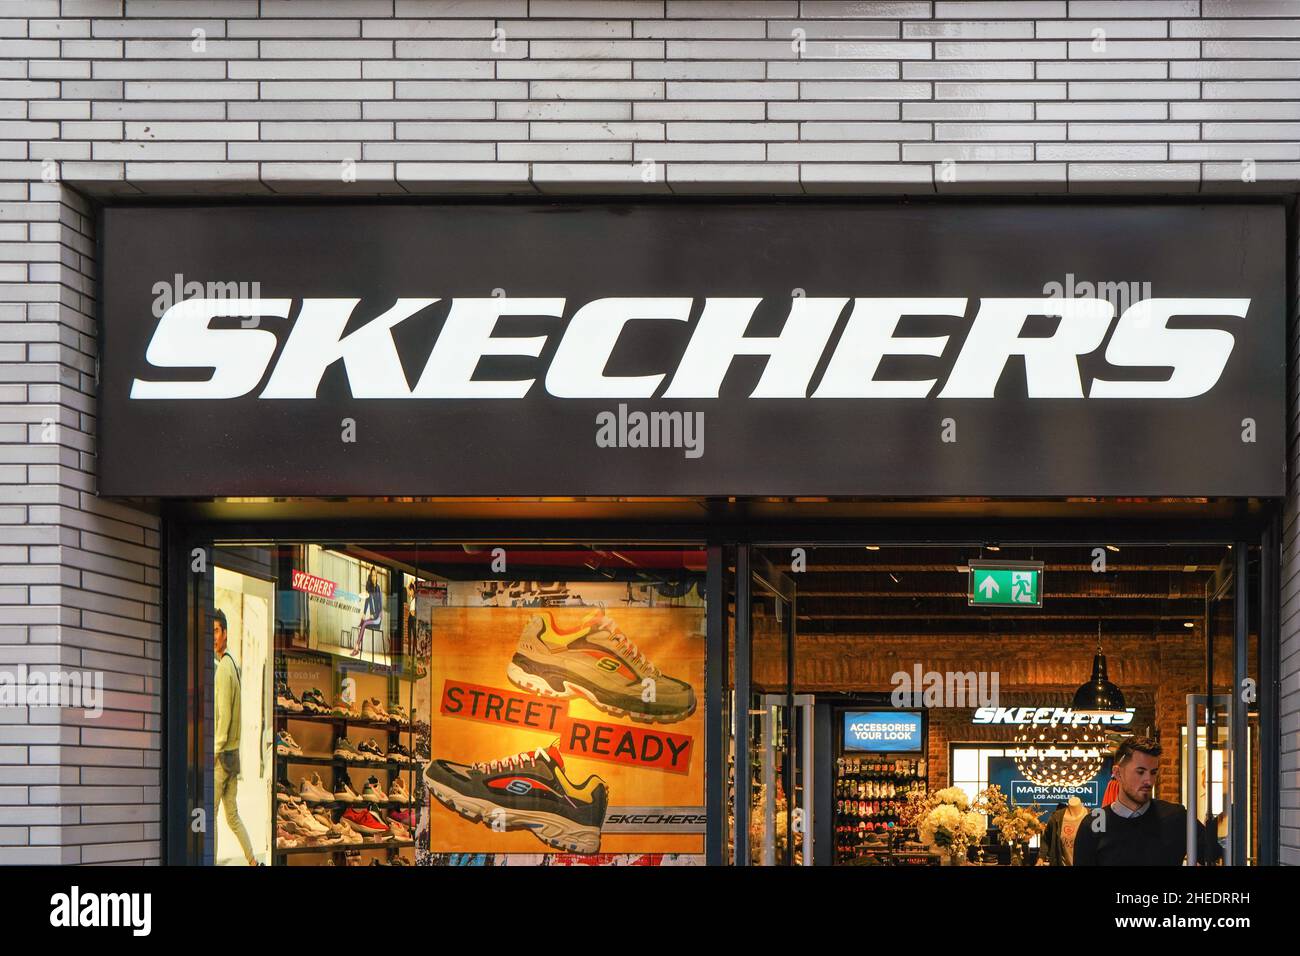 Skechers Logo High Resolution Stock Photography and Images - Alamy